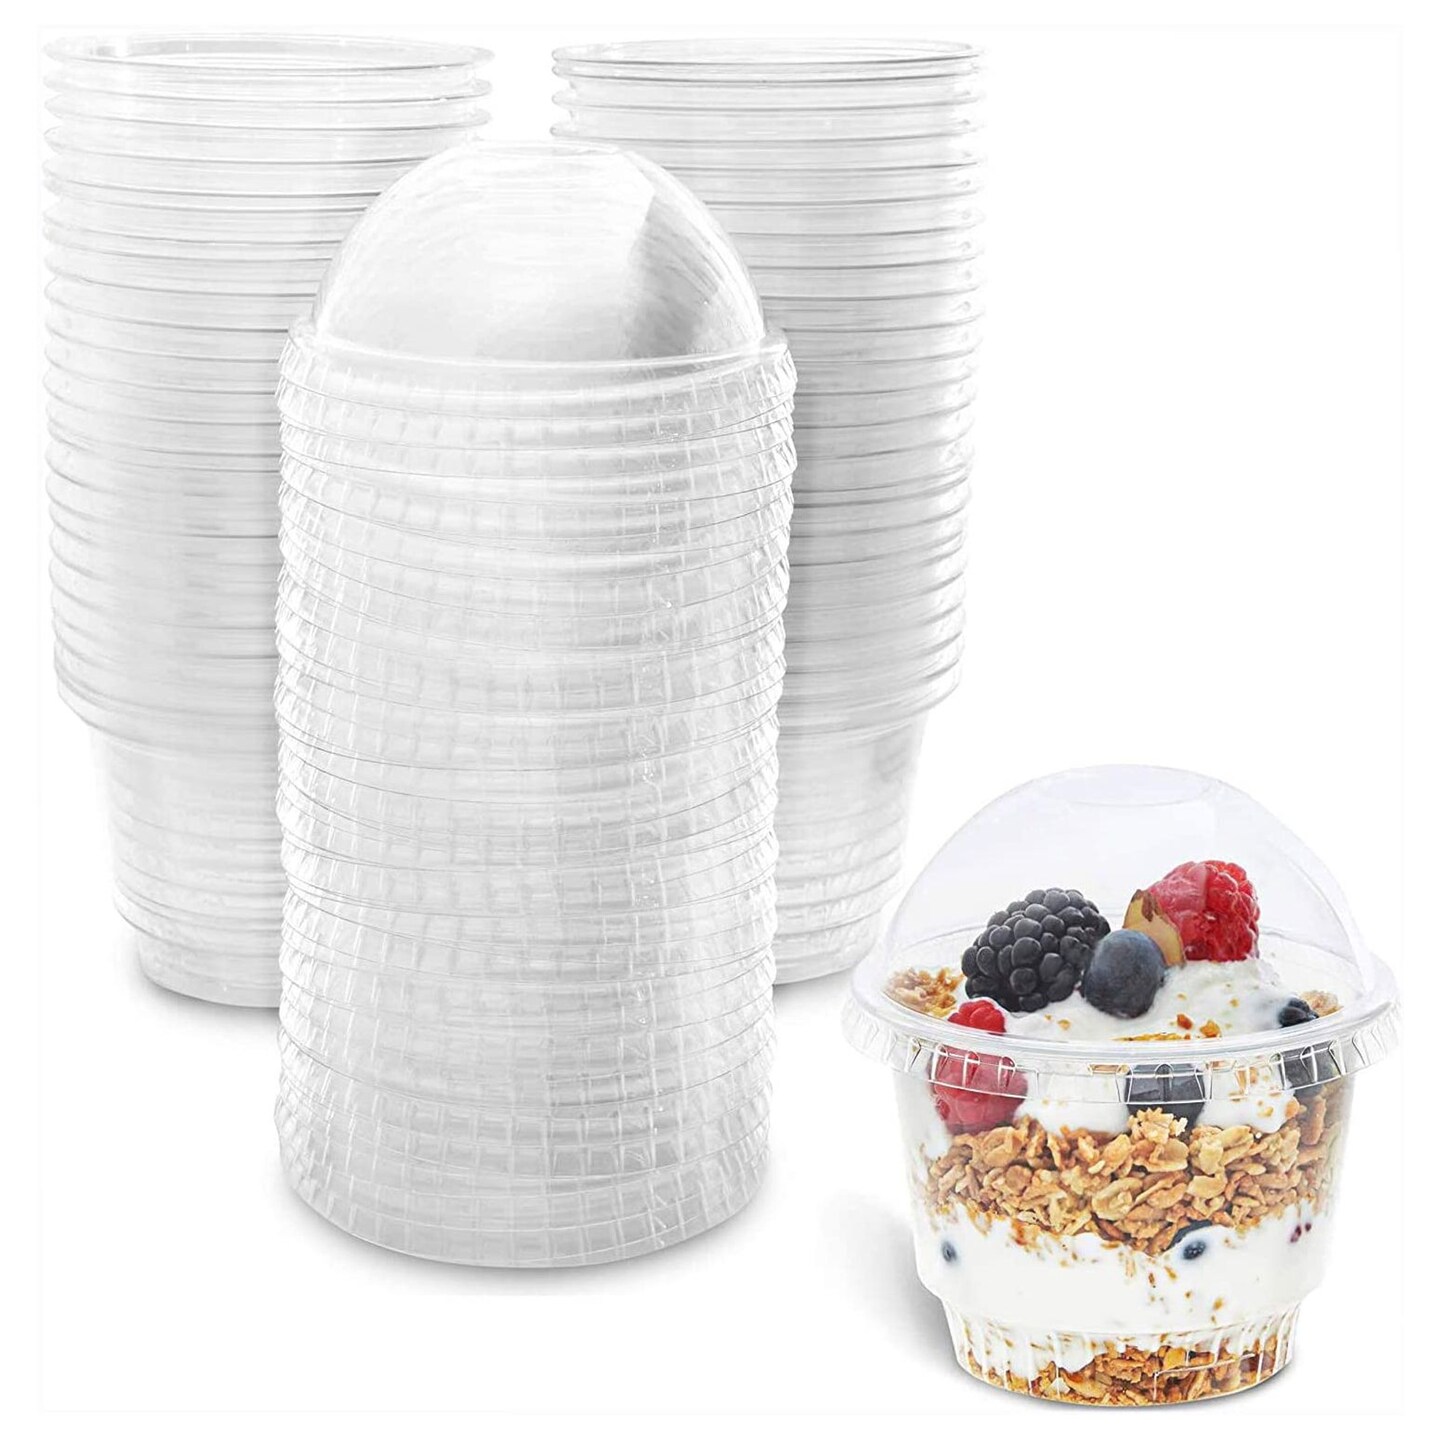 Disposable Dessert Cups With Lids, Pudding Cups, Ice Cream Cups